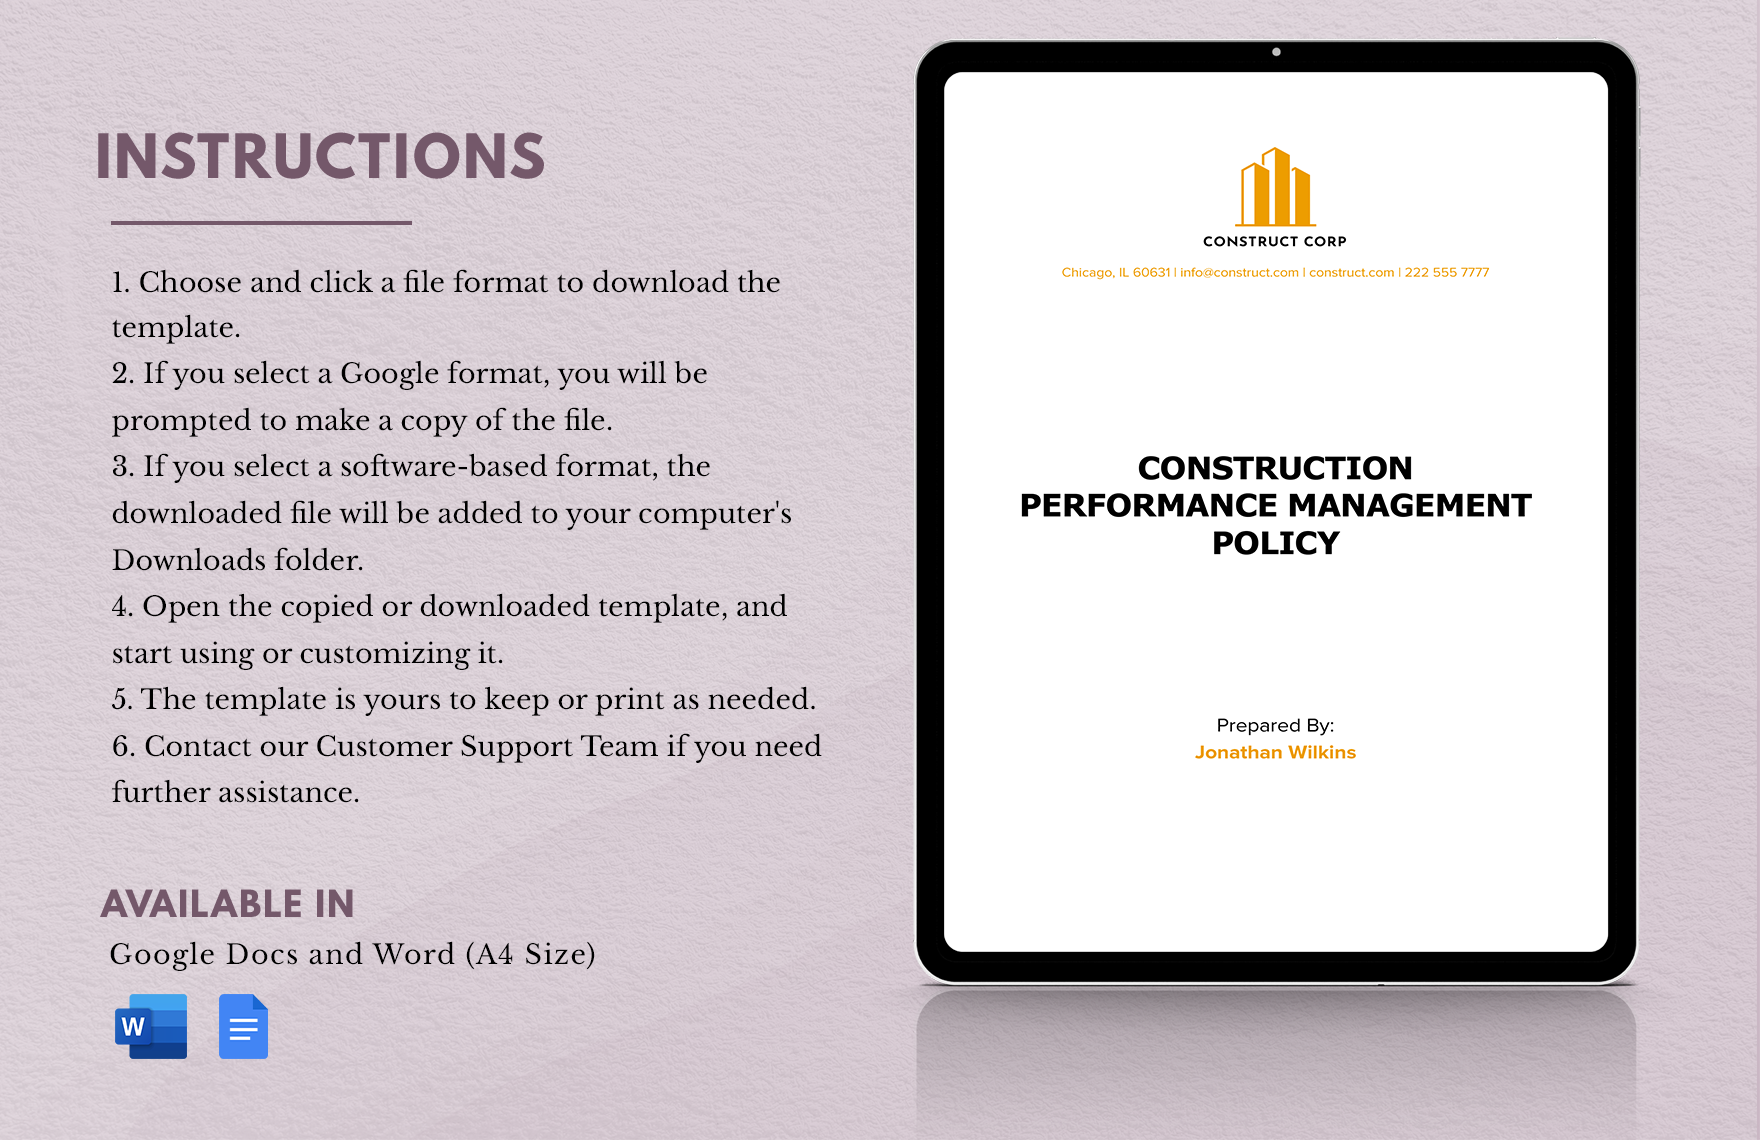 Construction Performance Management Policy Template